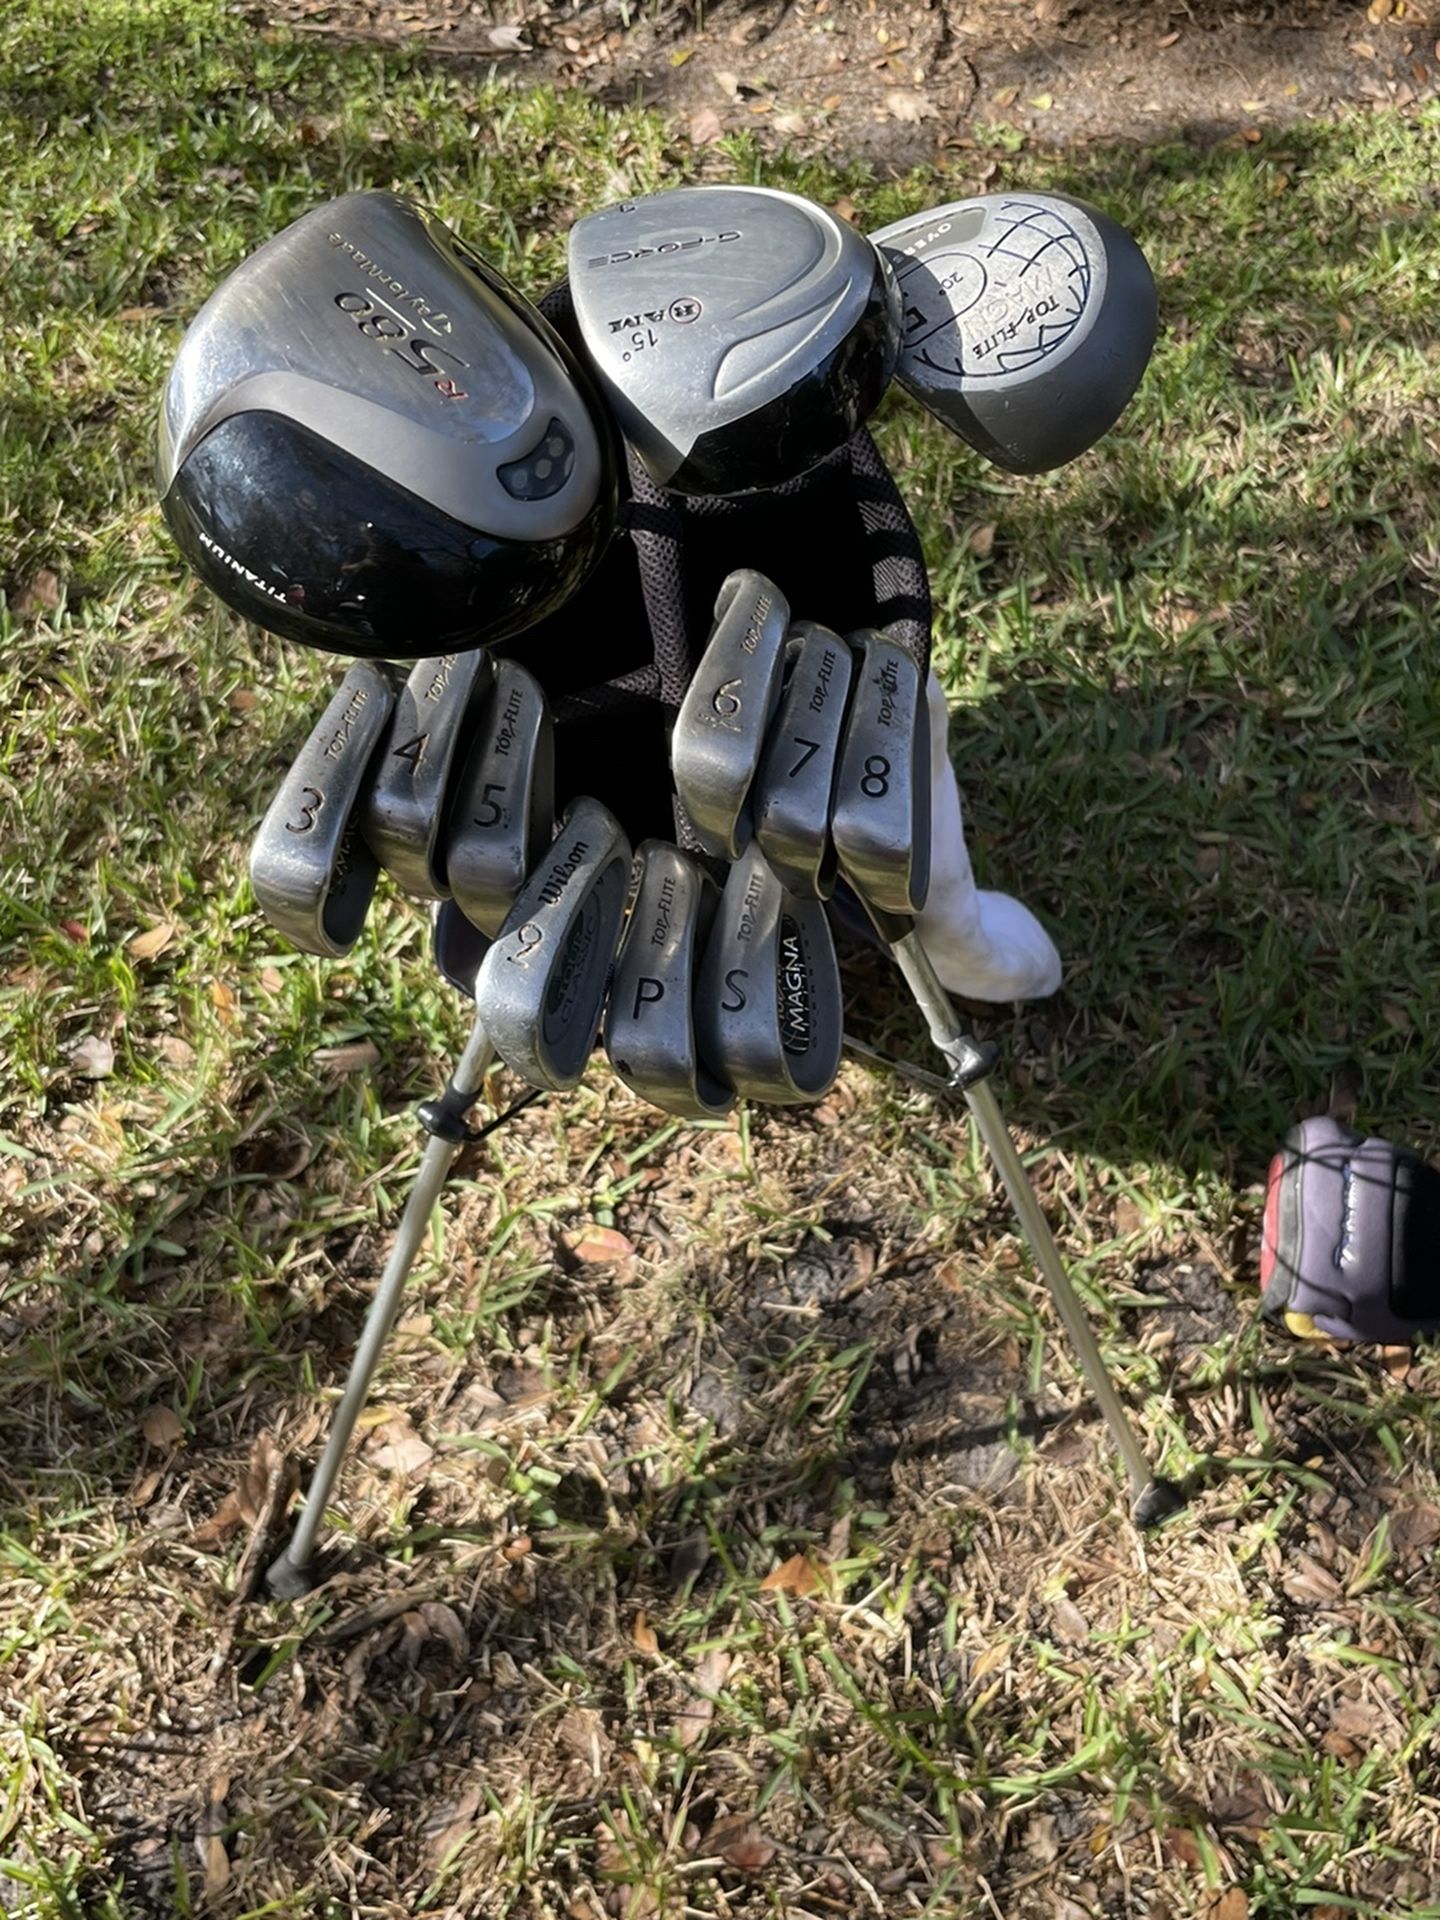 Men’s Golf Clubs (Driver, 3-wood, 5-wood, Irons And Bag)